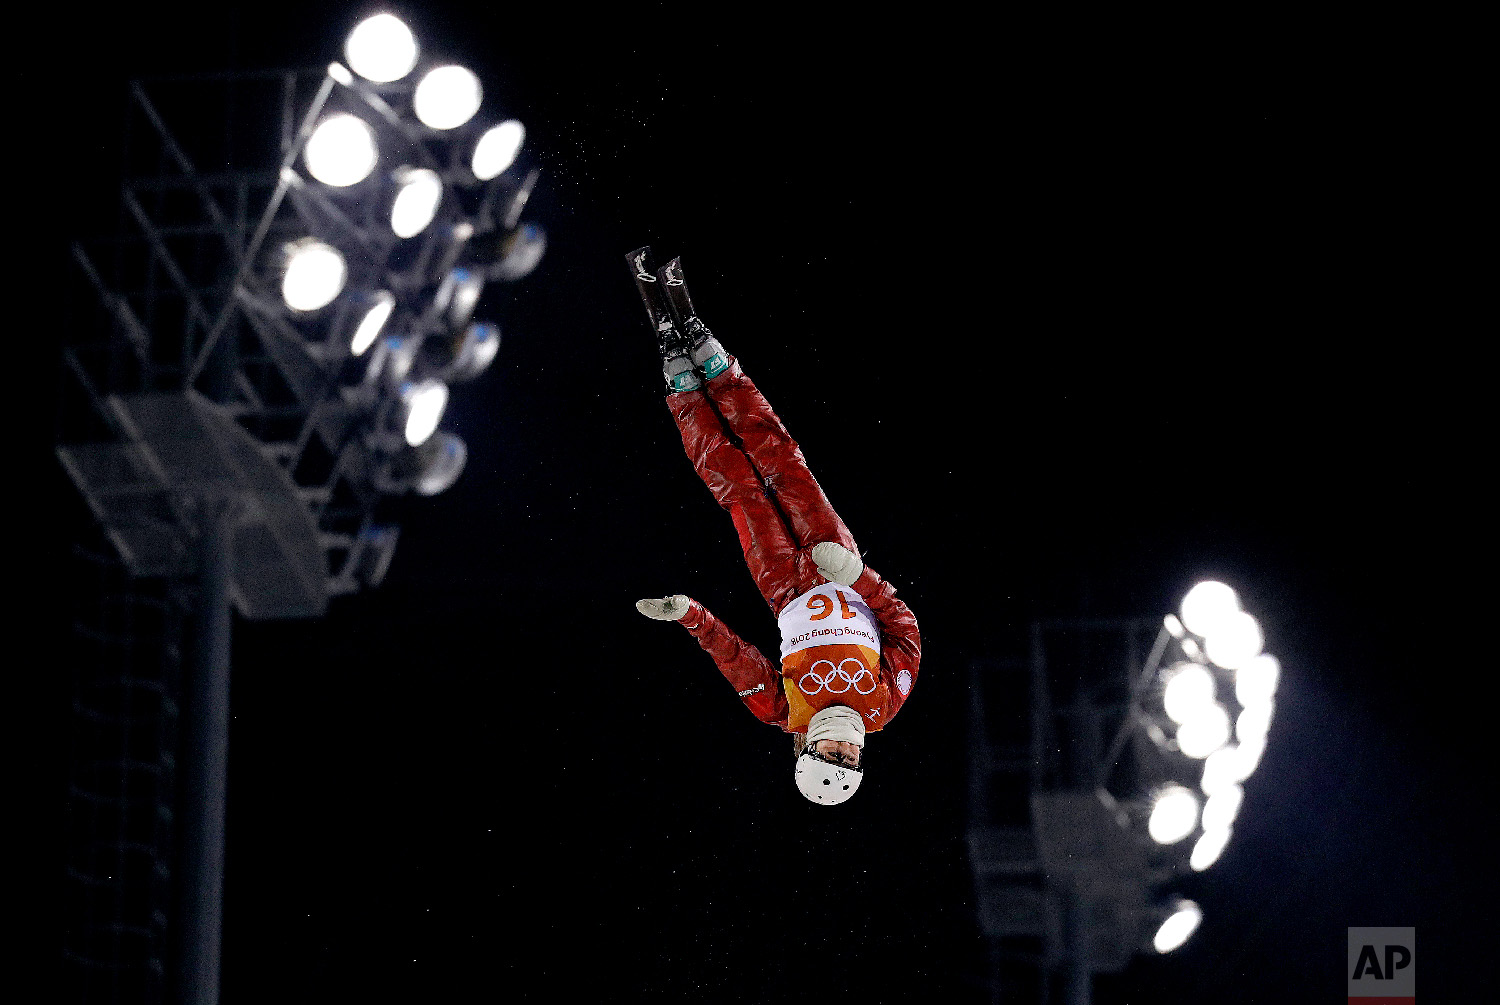  Russian athlete Liubov Nikitina jumps during the women's freestyle aerial final at Phoenix Snow Park at the 2018 Winter Olympics in Pyeongchang, South Korea, Friday, Feb. 16, 2018. (AP Photo/Kin Cheung) 